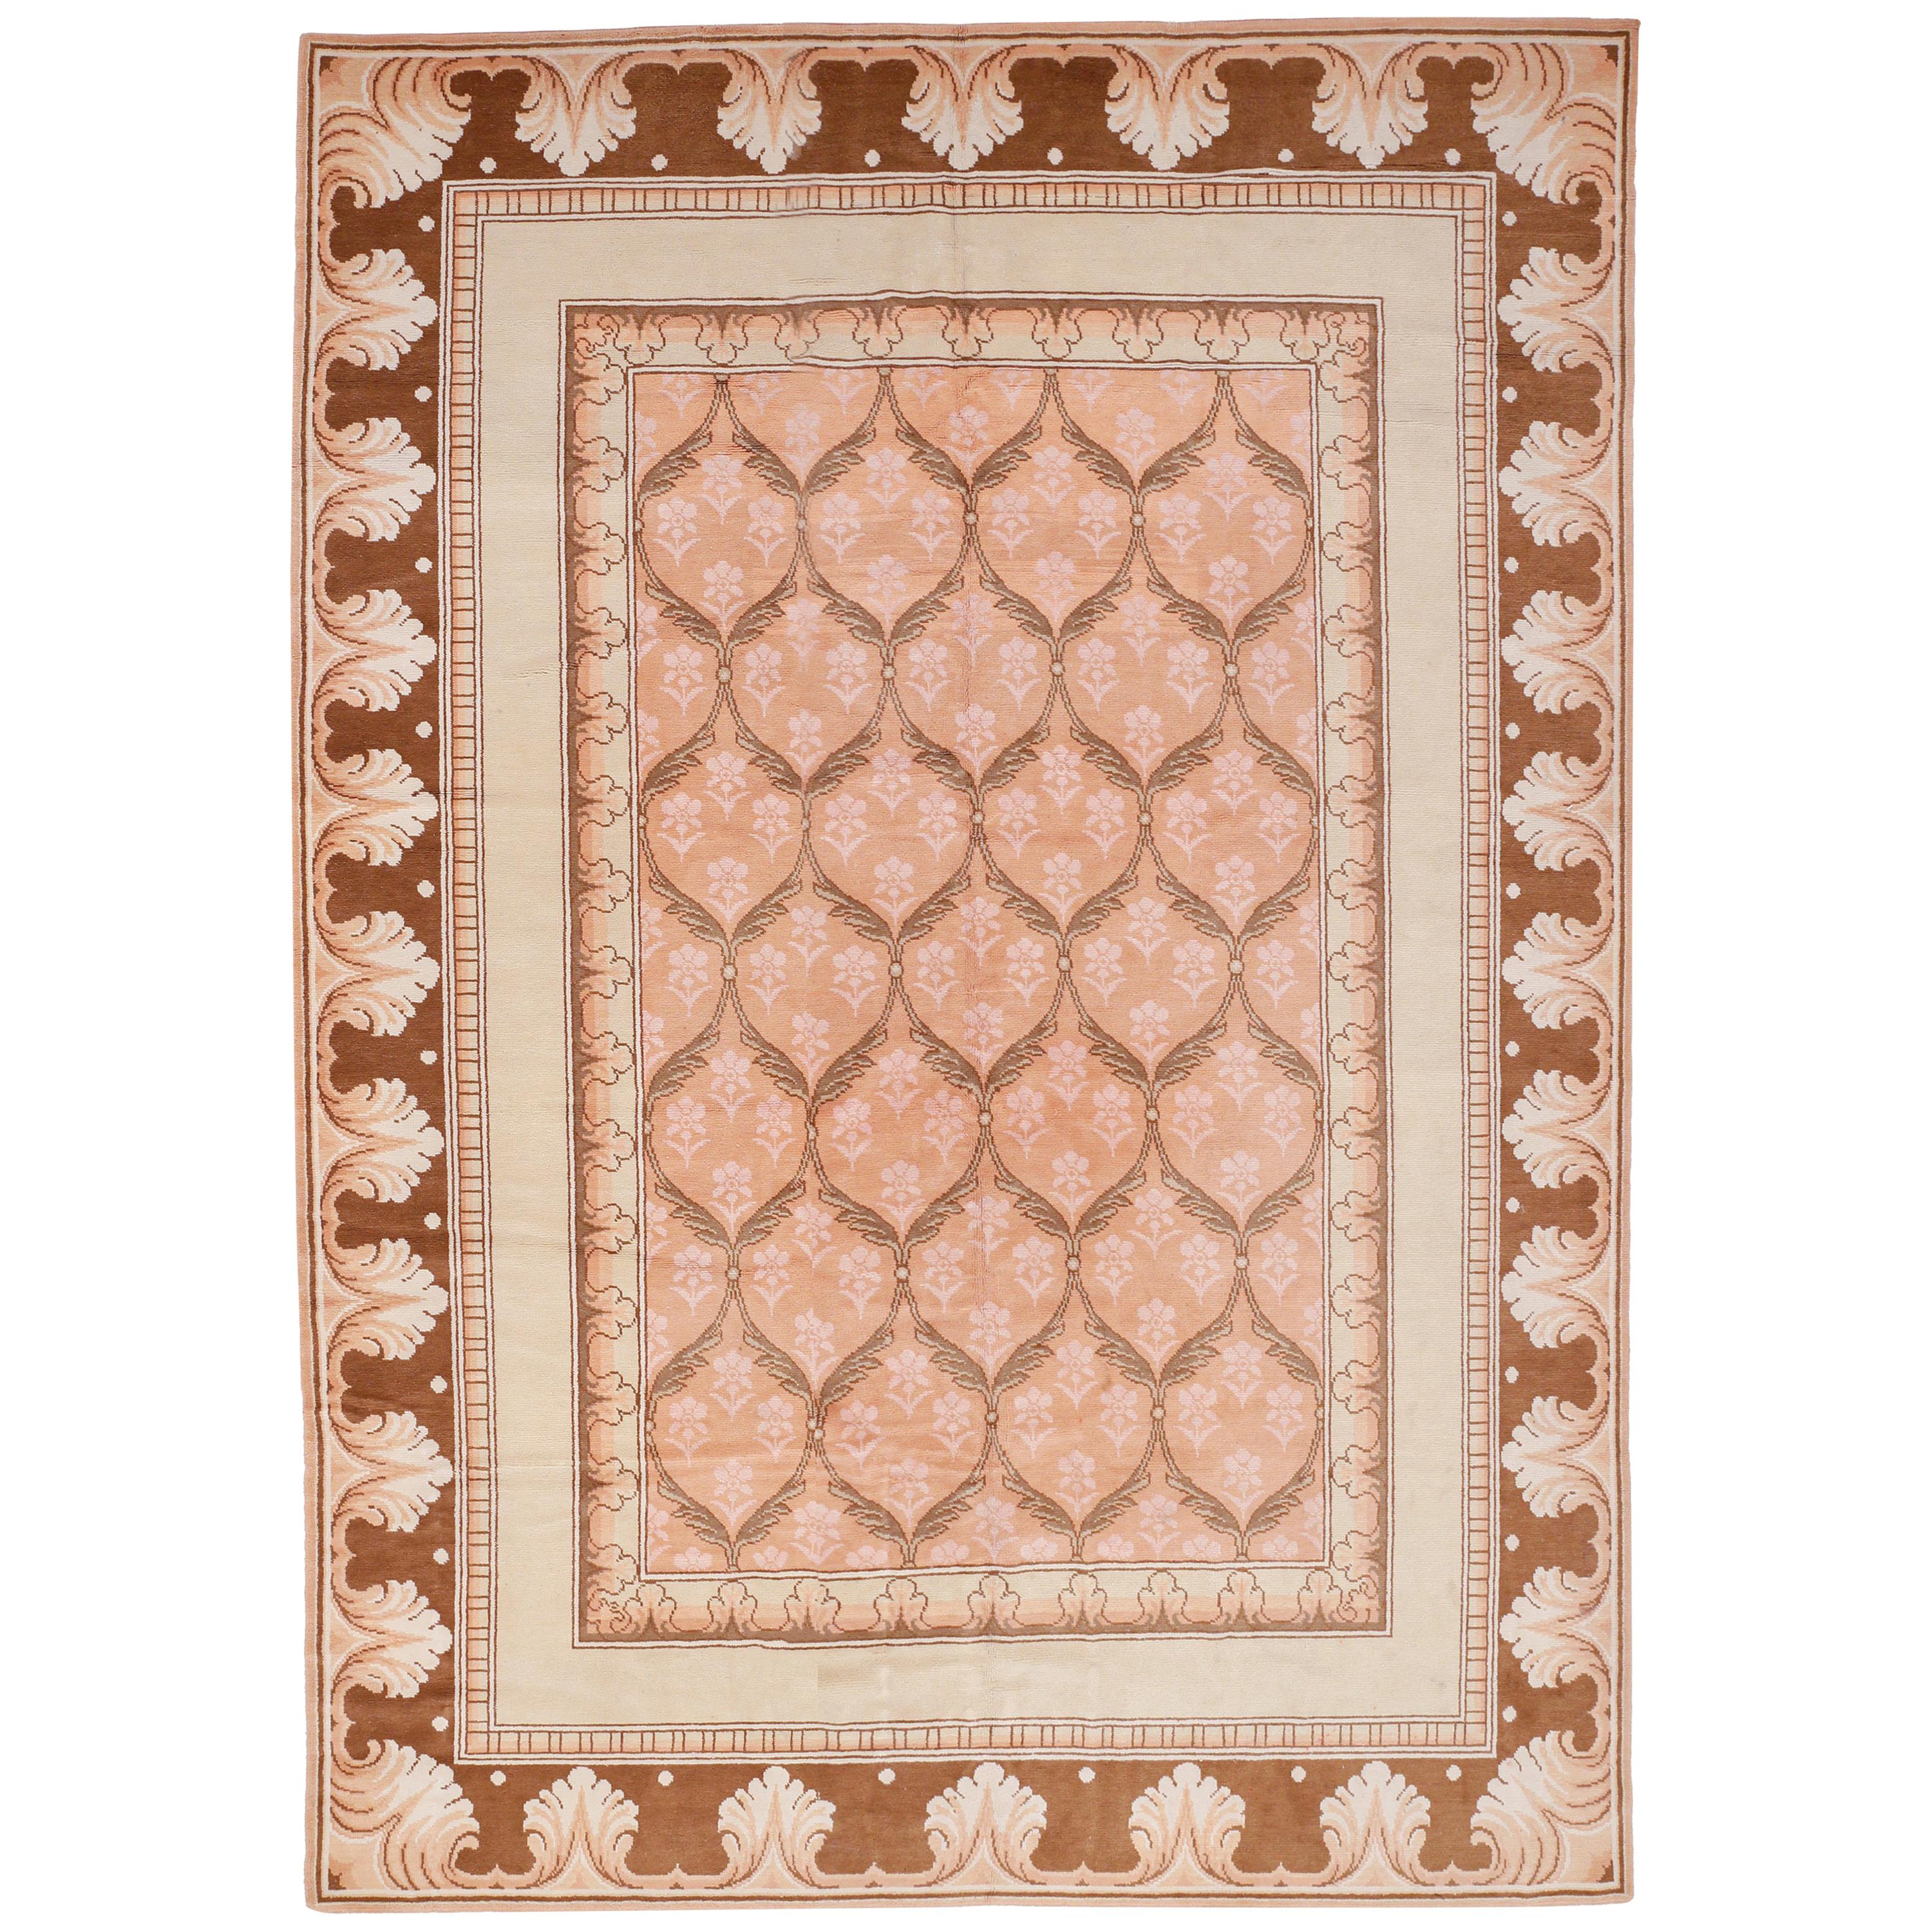 Antique Wilton Rug with Arts & Crafts Pattern in Pastel Colors, circa 1910 For Sale